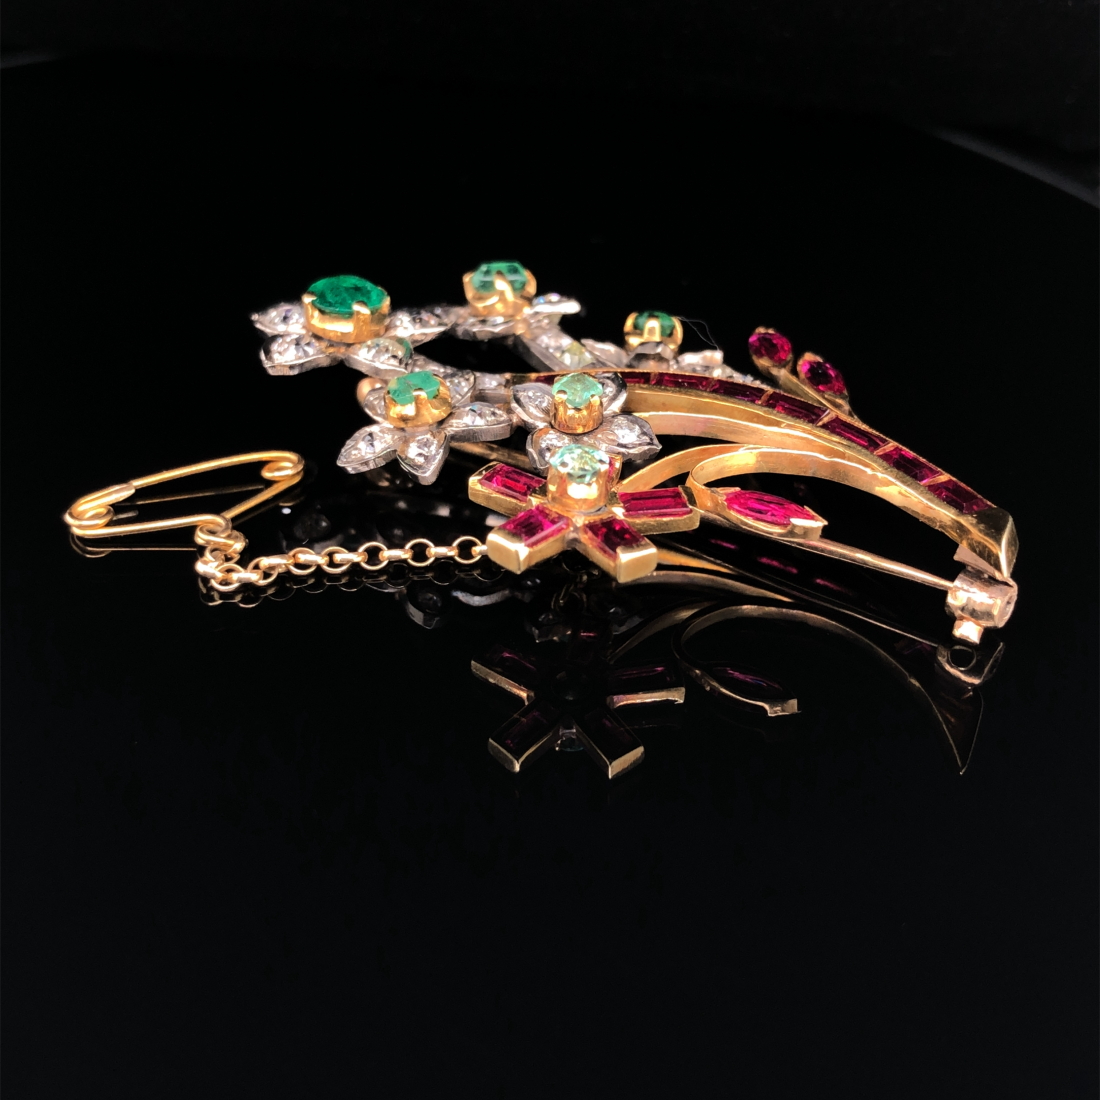 A 20th CENTURY DIAMOND, EMERALD AND RUBY SPRAY BROOCH. THE BROOCH UNHALLMARKED, ASSESSED VARIOUSLY - Image 6 of 6